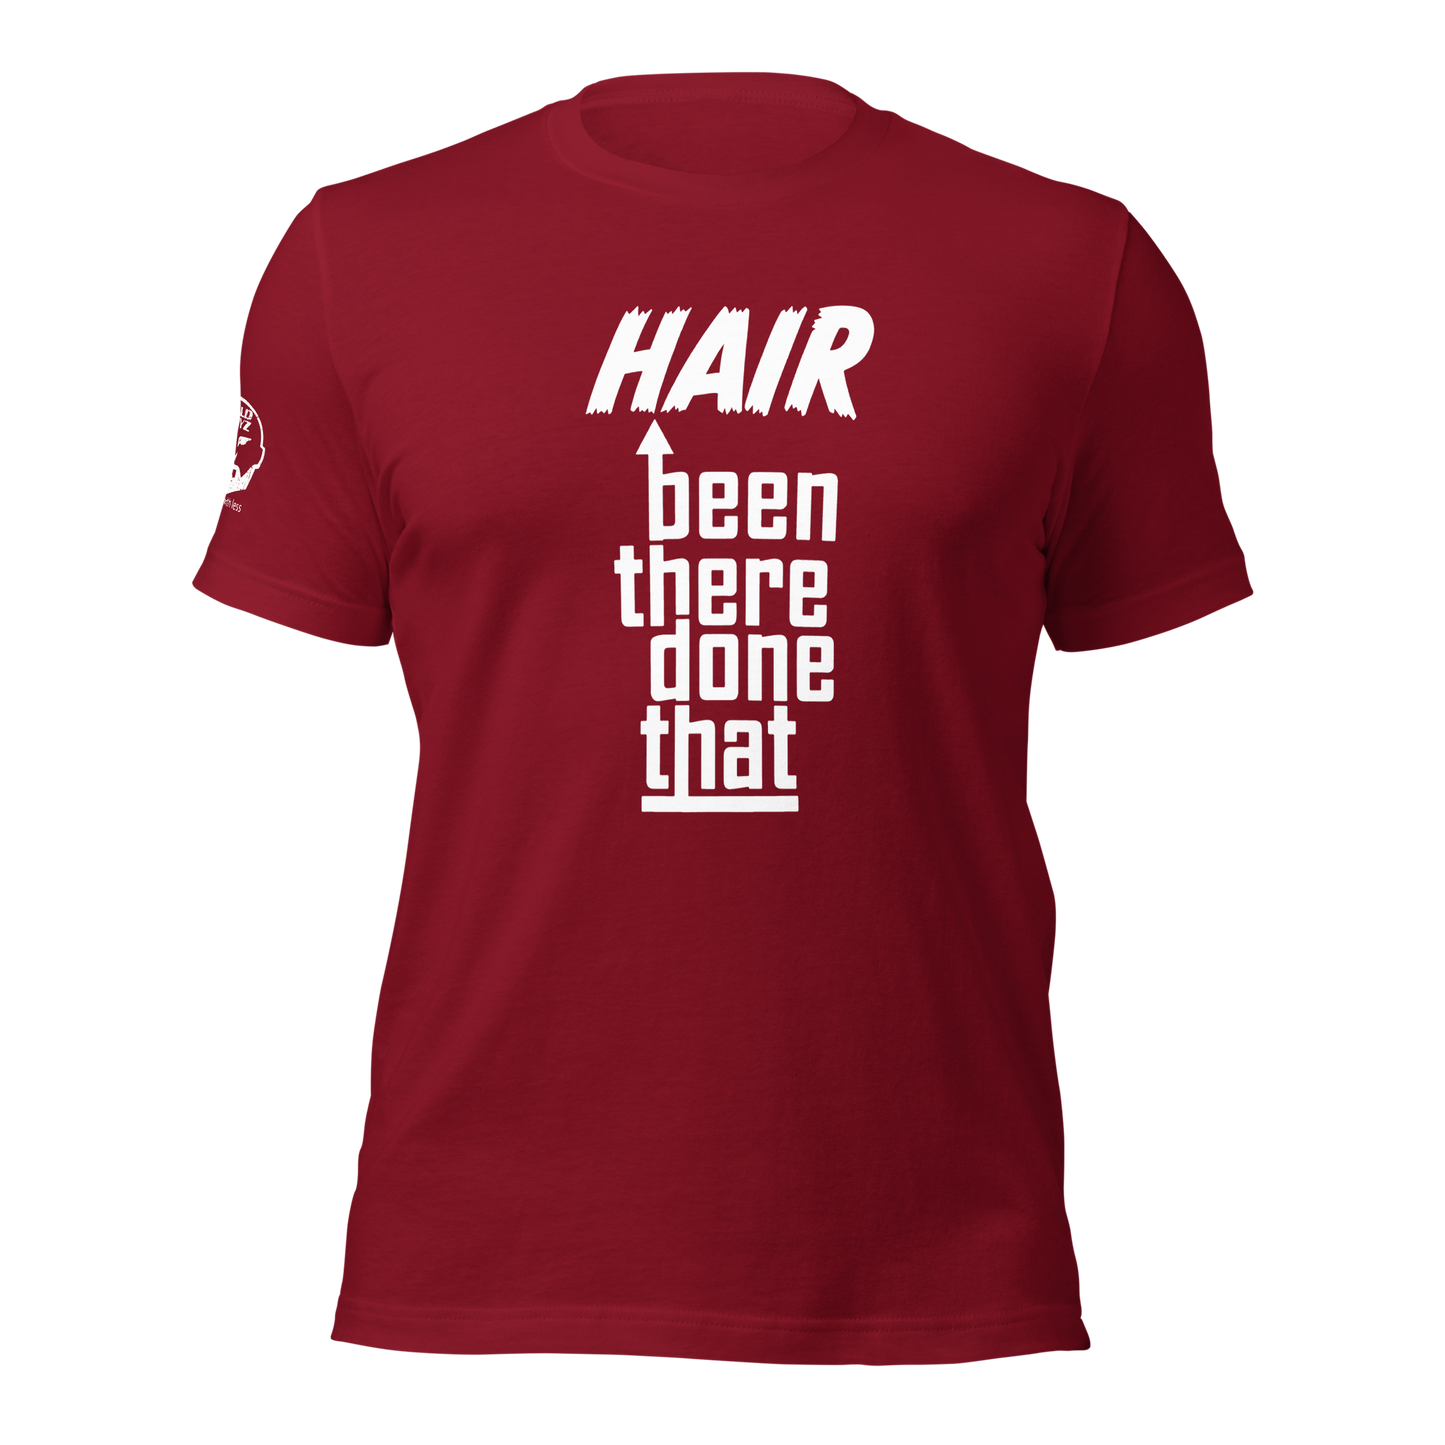 Hair Been There Done That t-shirt